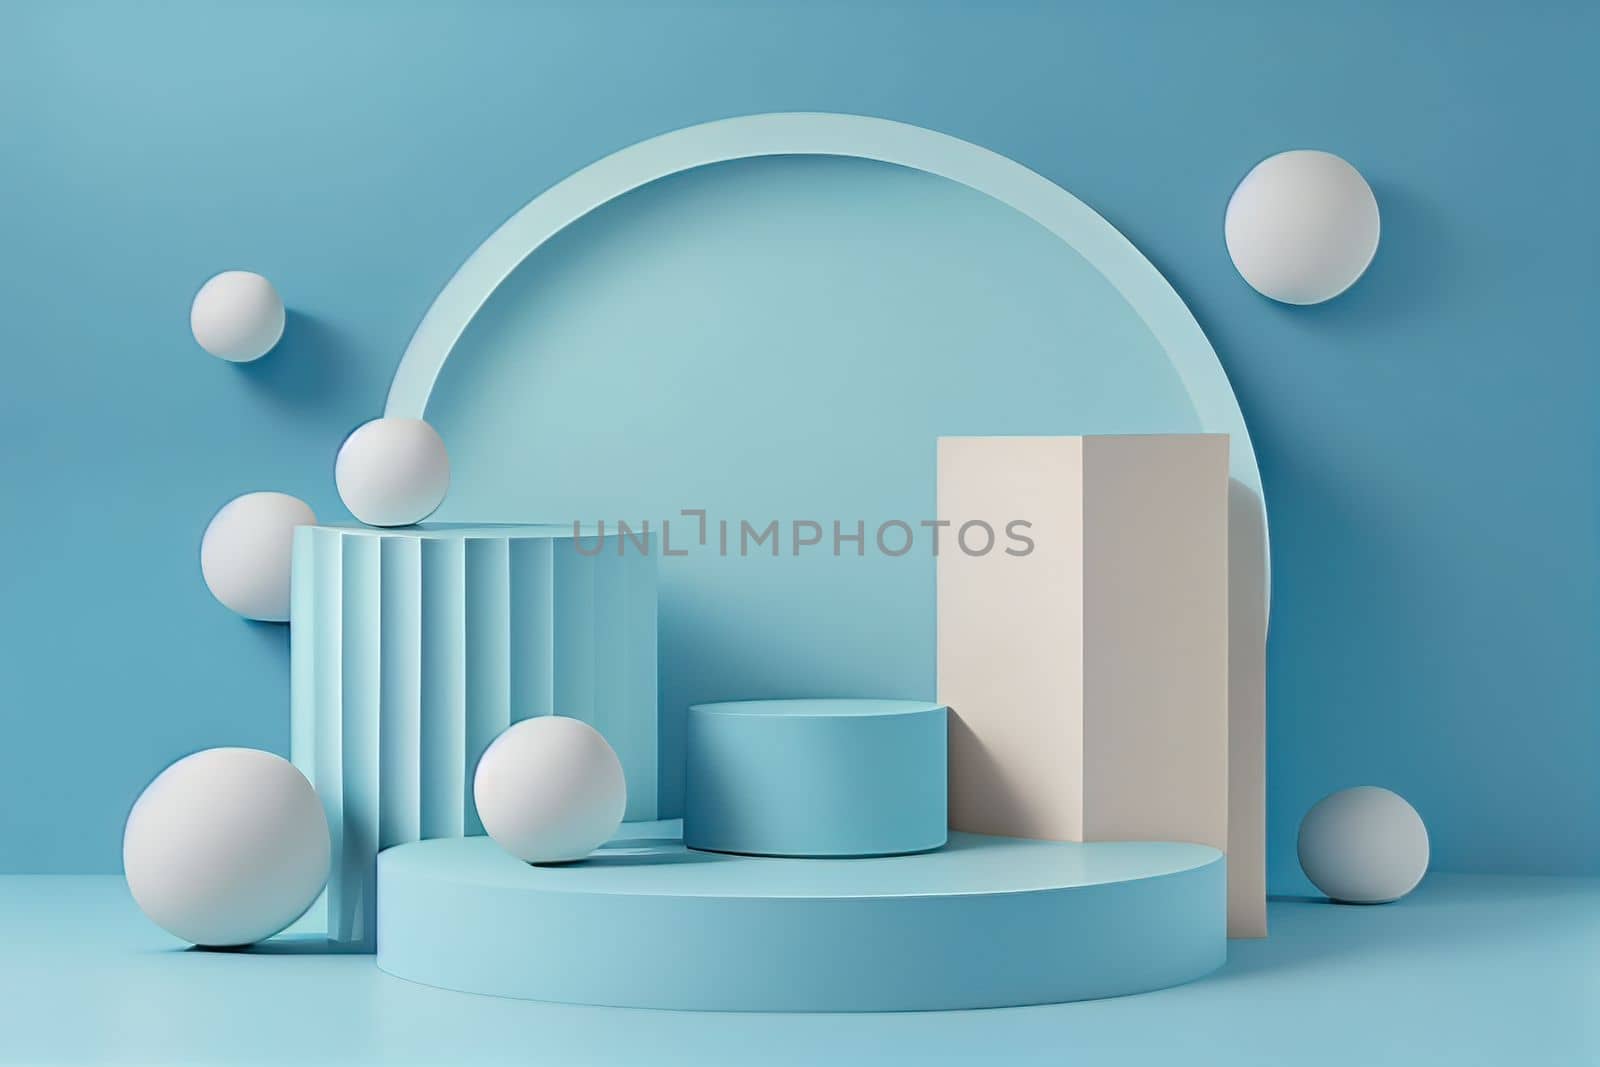 Pedestal podium with rounded corners in blue and white. Platform with geometric shapes. by FokasuArt